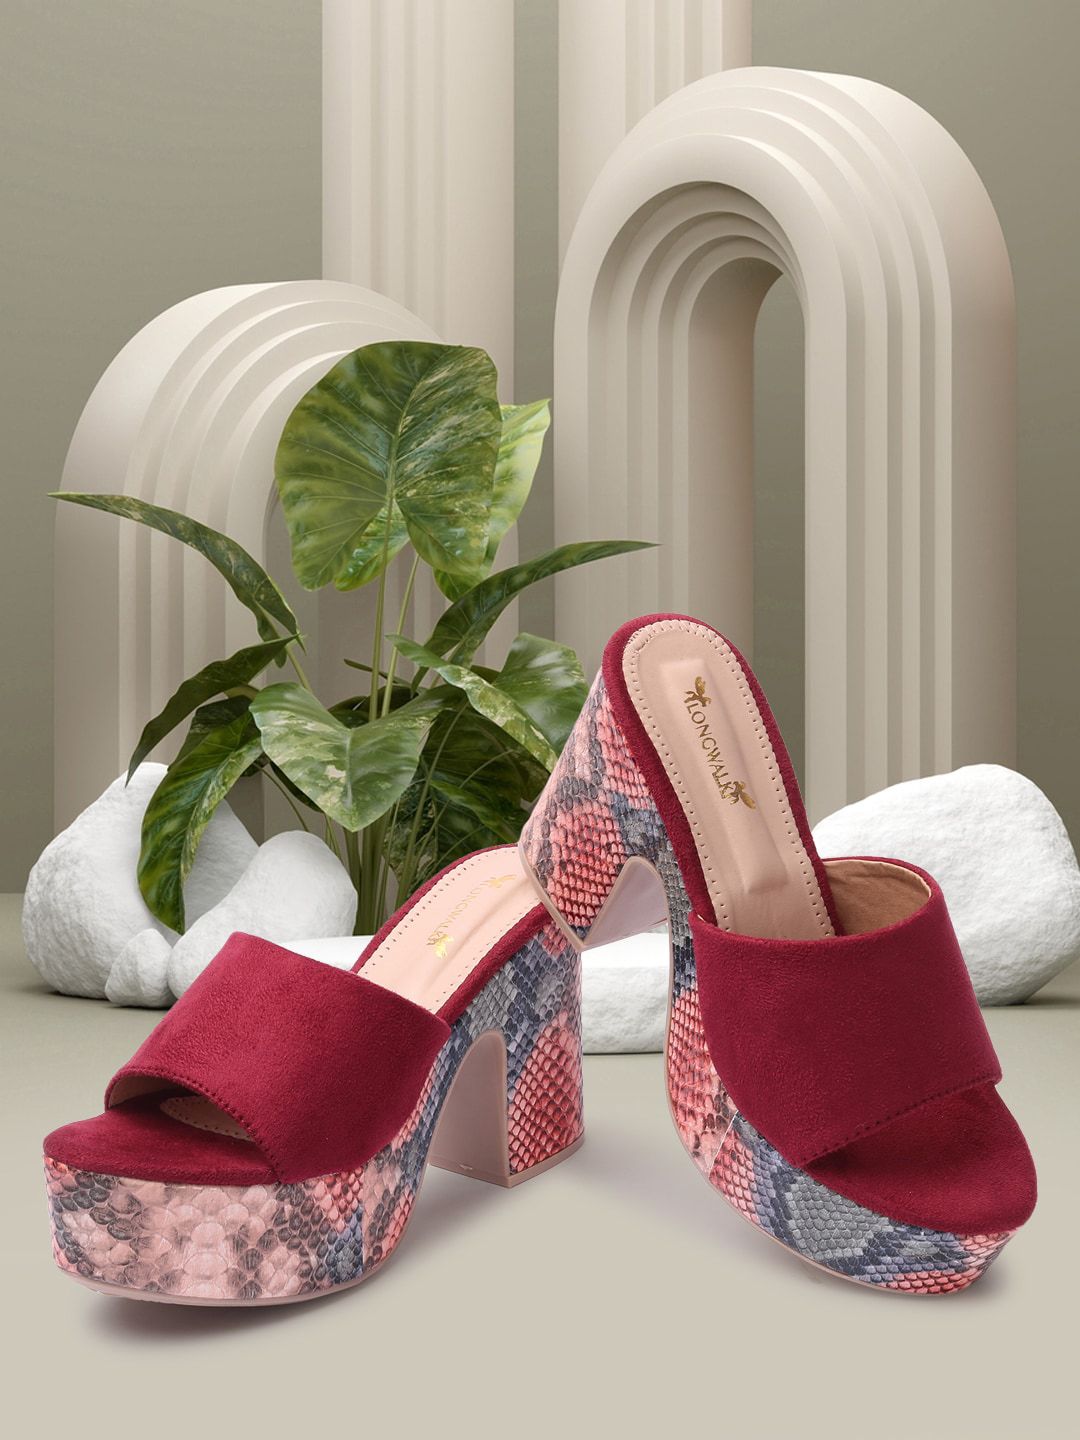 Longwalk Red Printed Suede Wedge Pumps with Bows Price in India